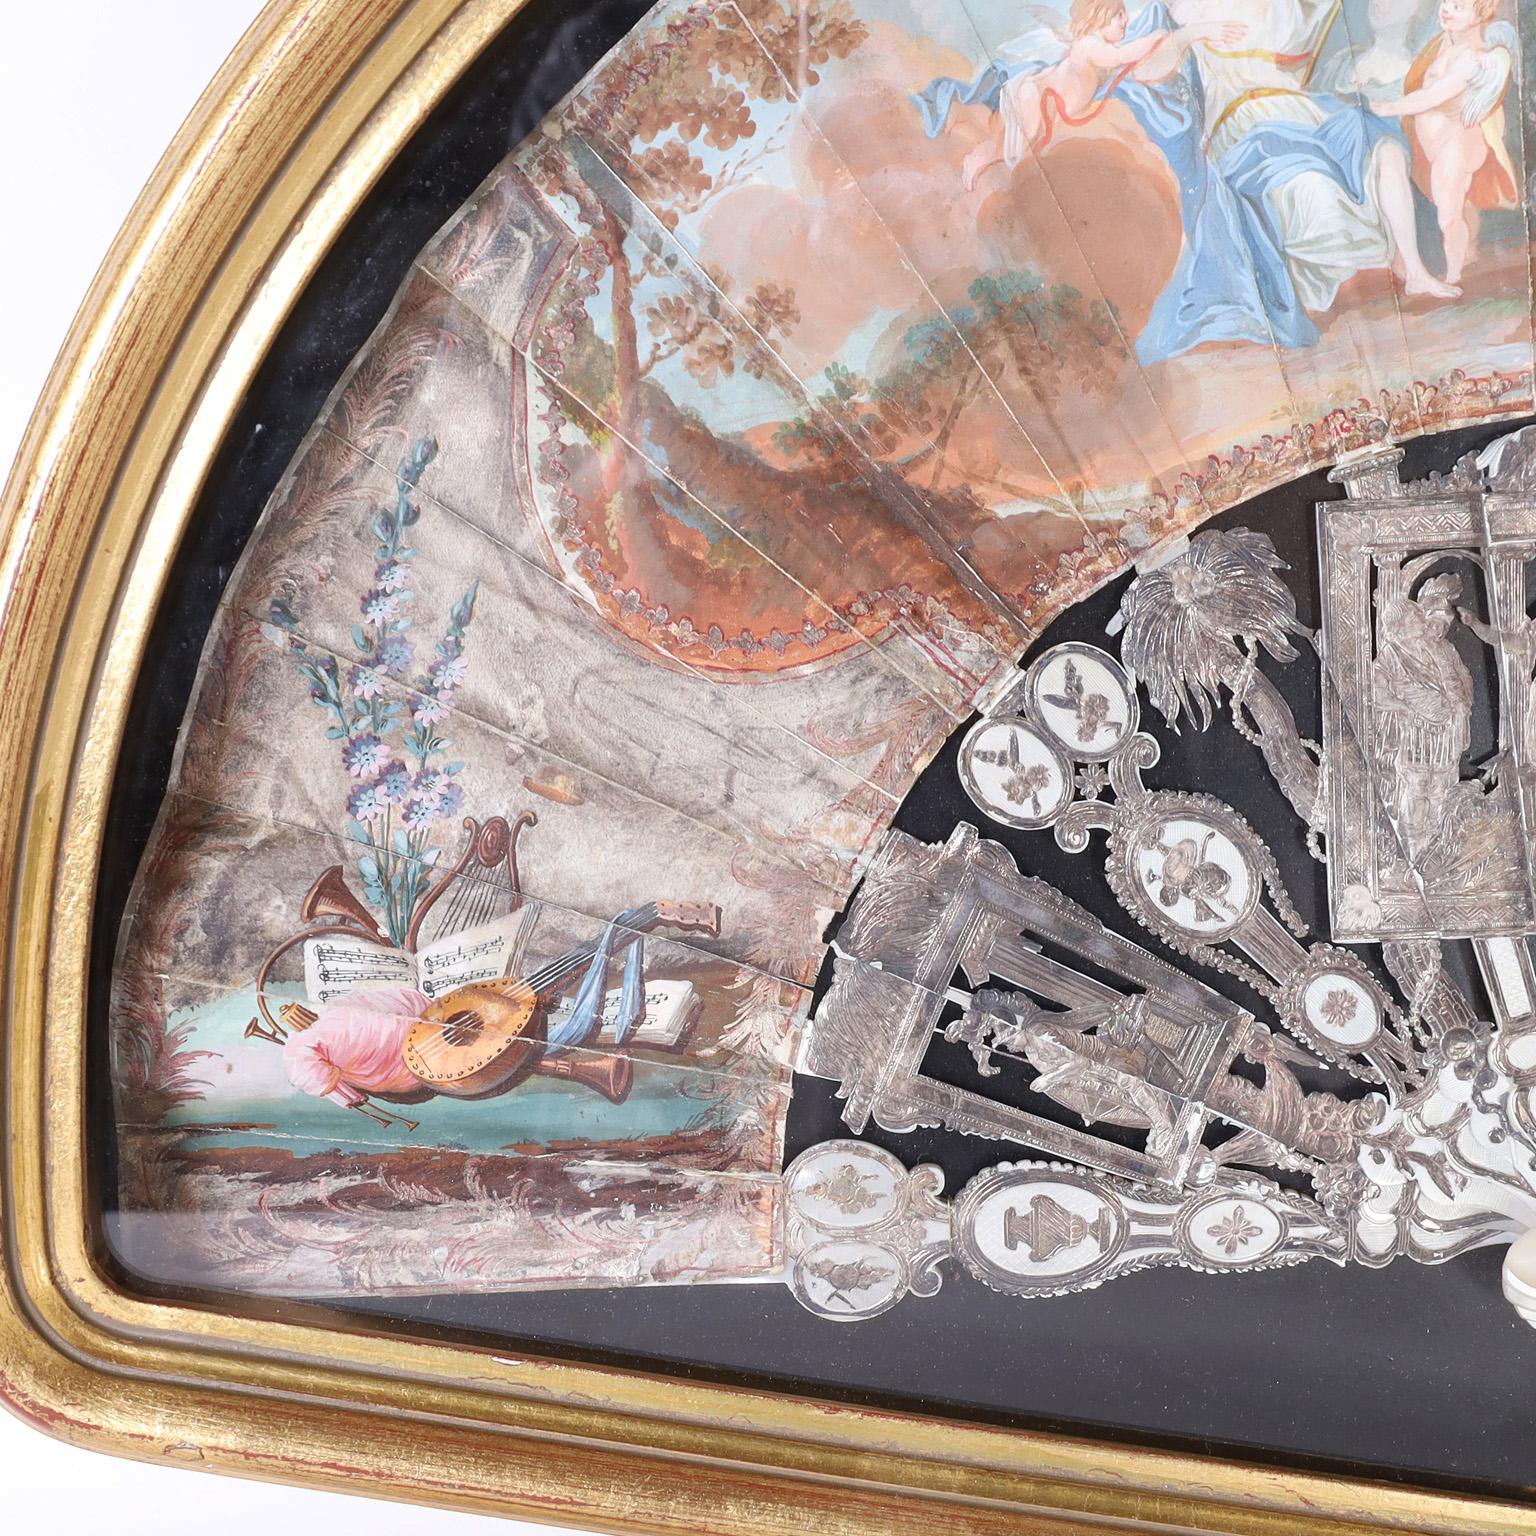 Impressive 19th century Italian hand fan, remarkably preserved with silvered metal sticks and guards depicting ancient gods, palm trees and classical emblemes. The paper leaves are hand painted watercolors of romantic courting scenes in a garden